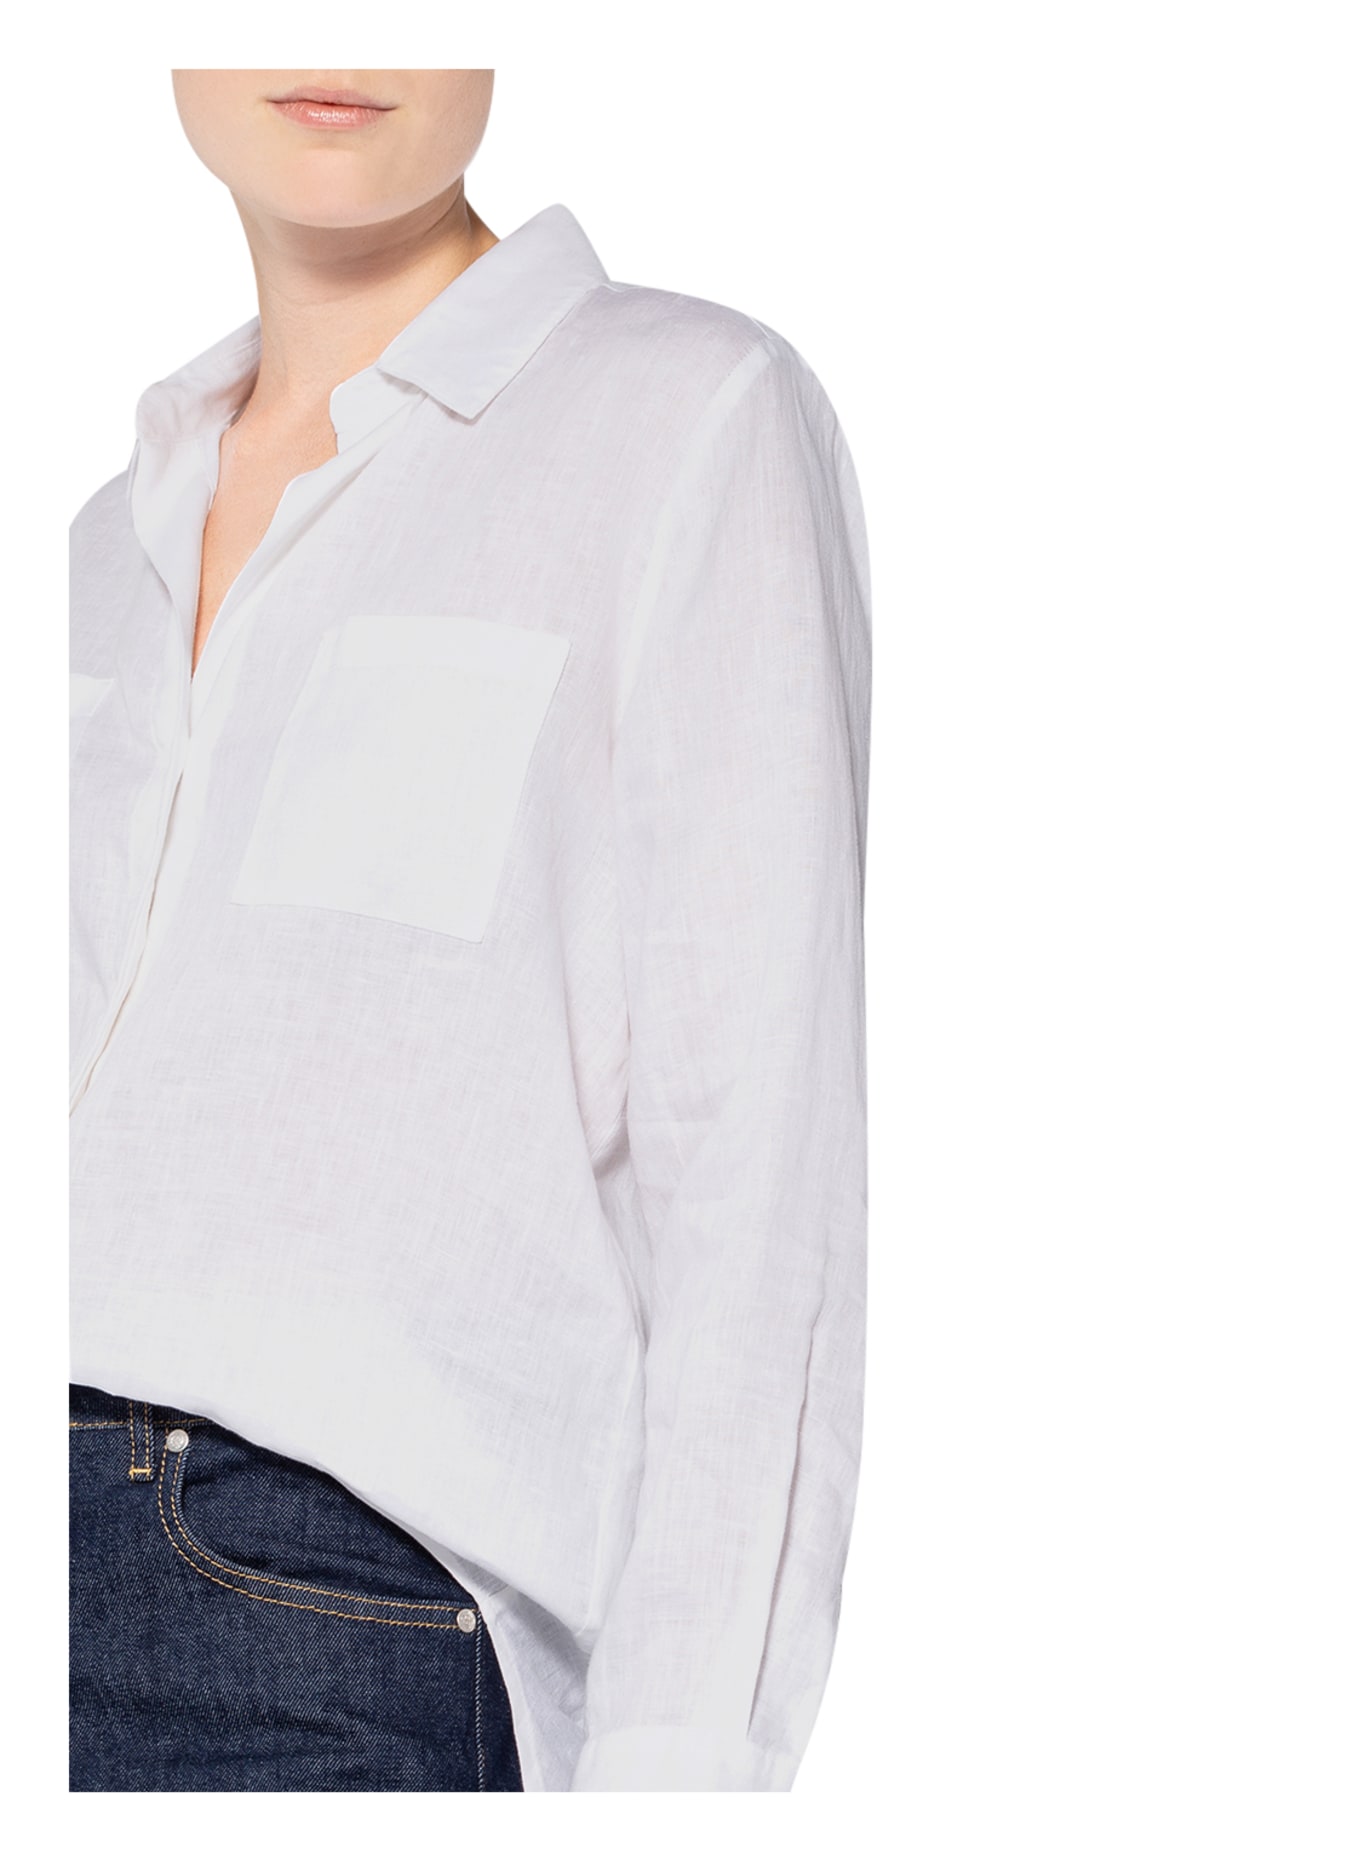 REPEAT Shirt blouse made of linen, Color: WHITE (Image 4)